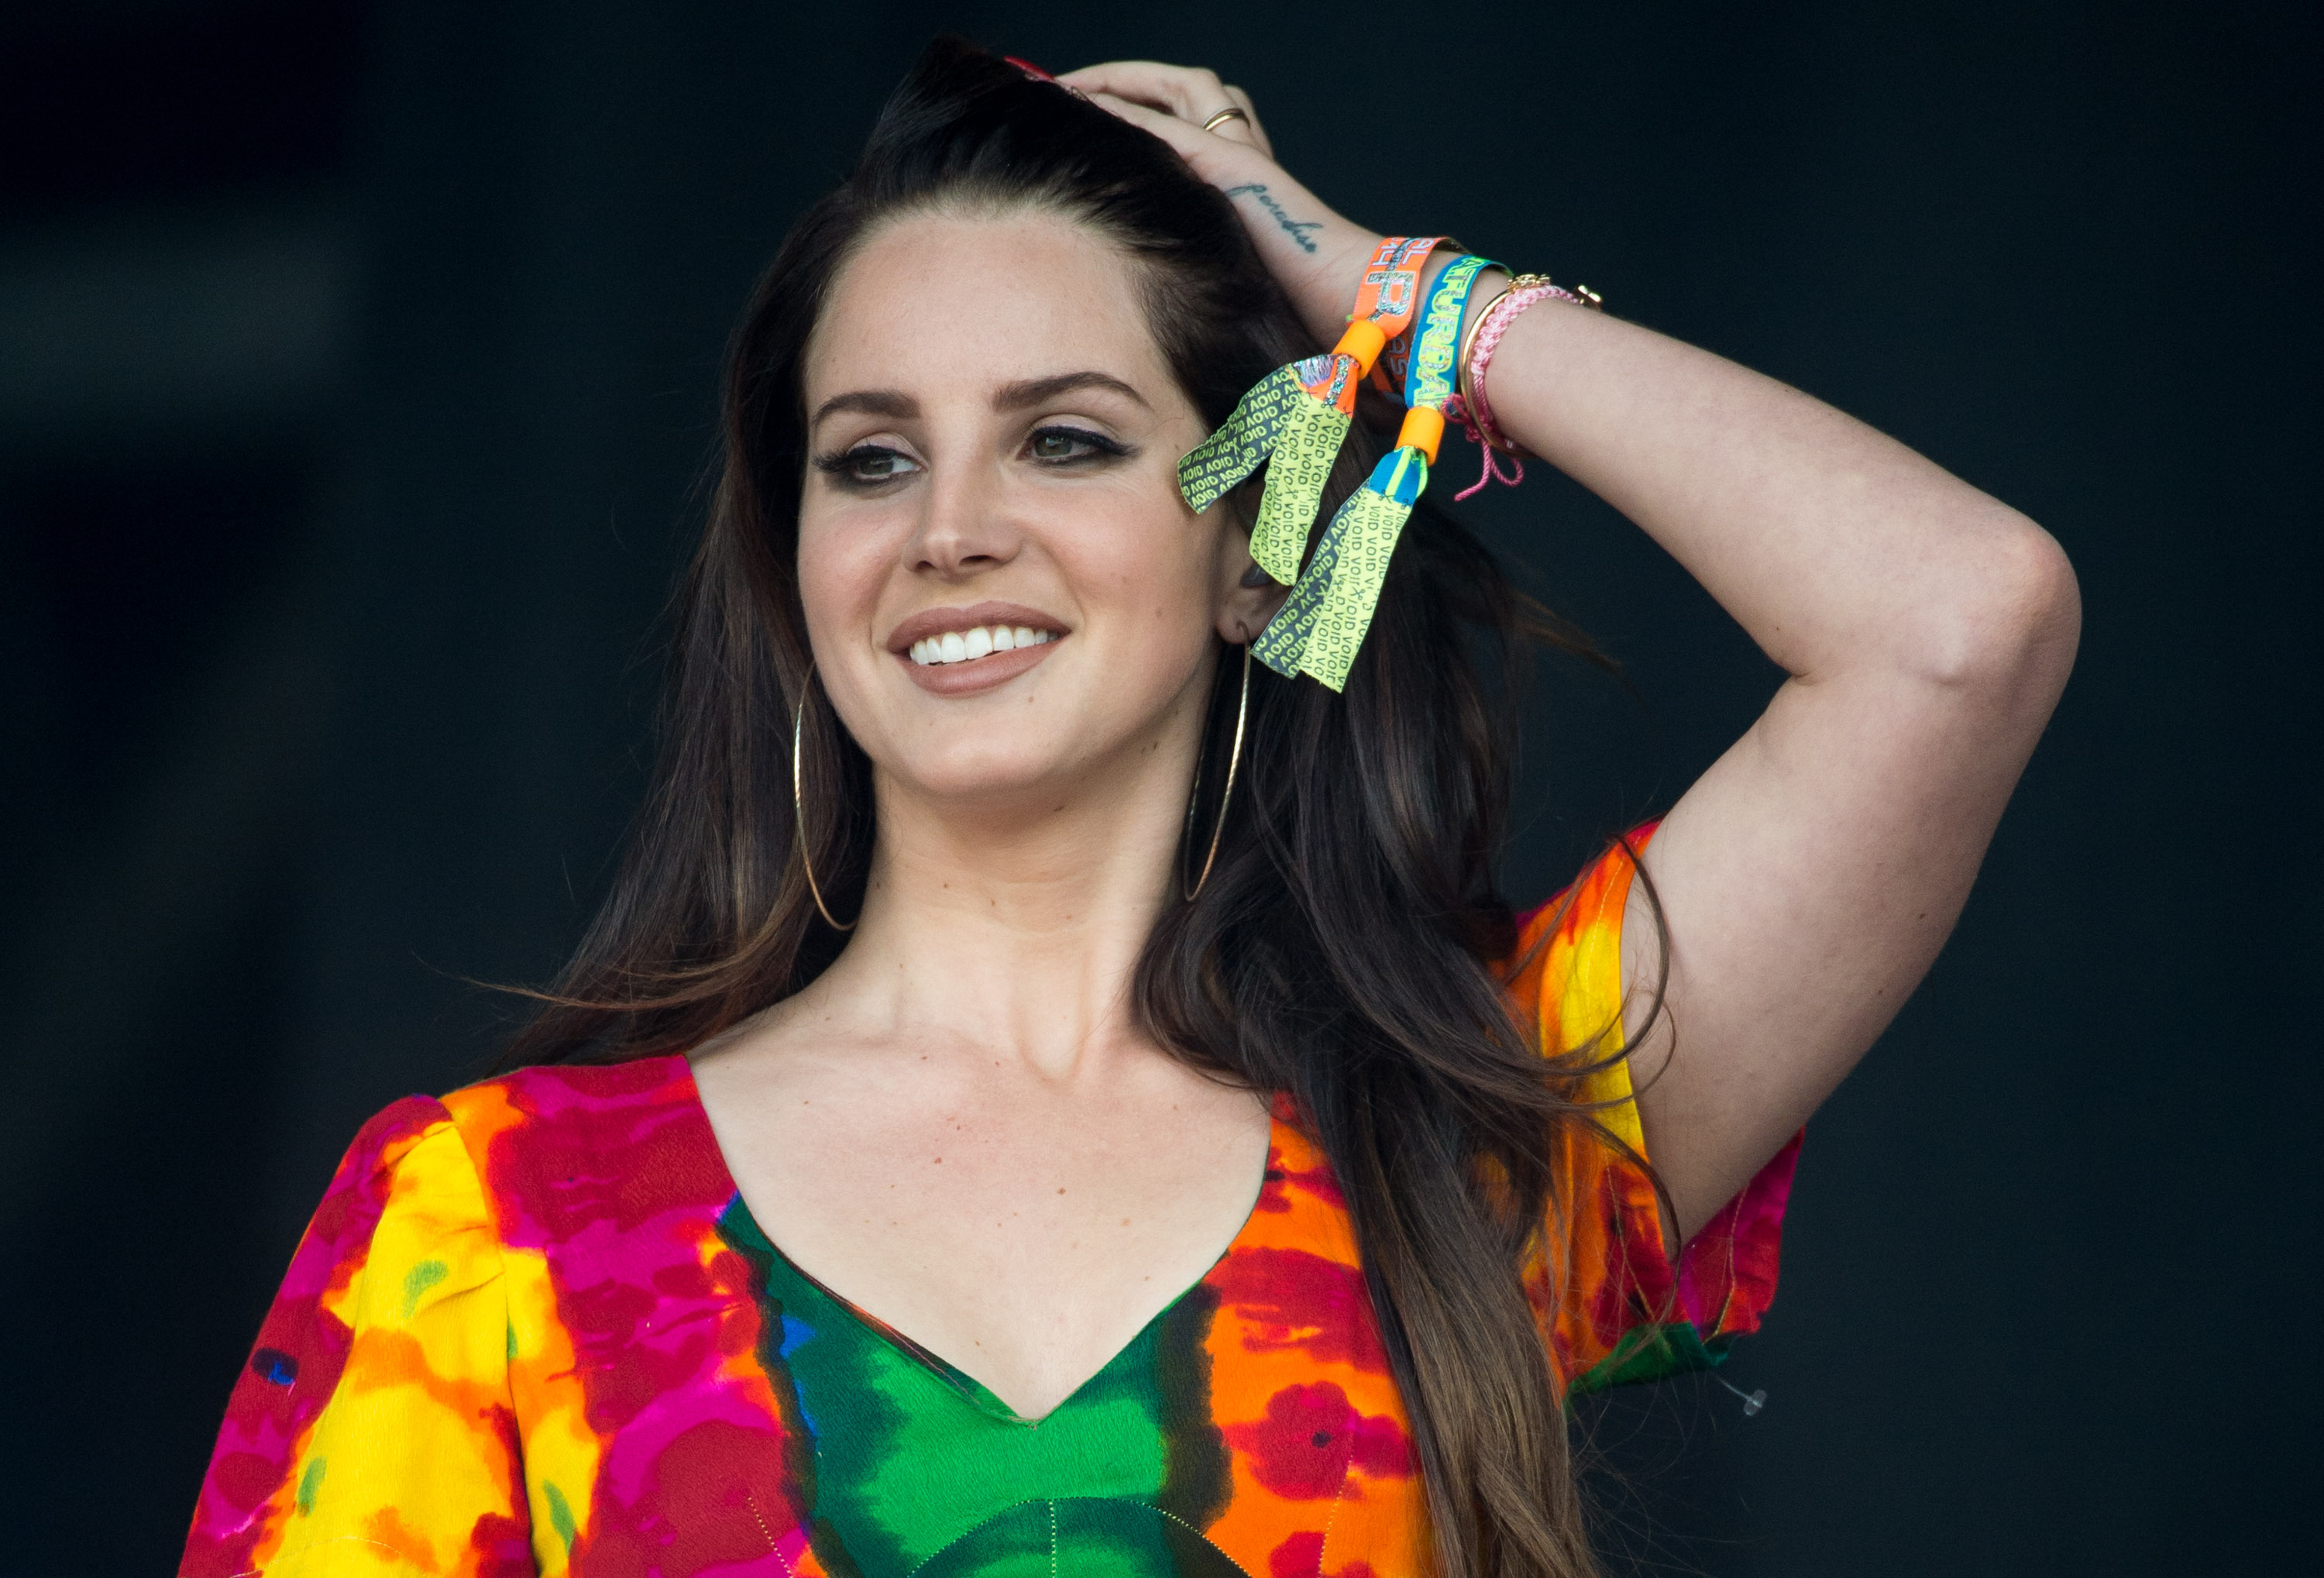 13 Times Lana Rey Was By Fashion Beauty In Her Lyrics And Videos